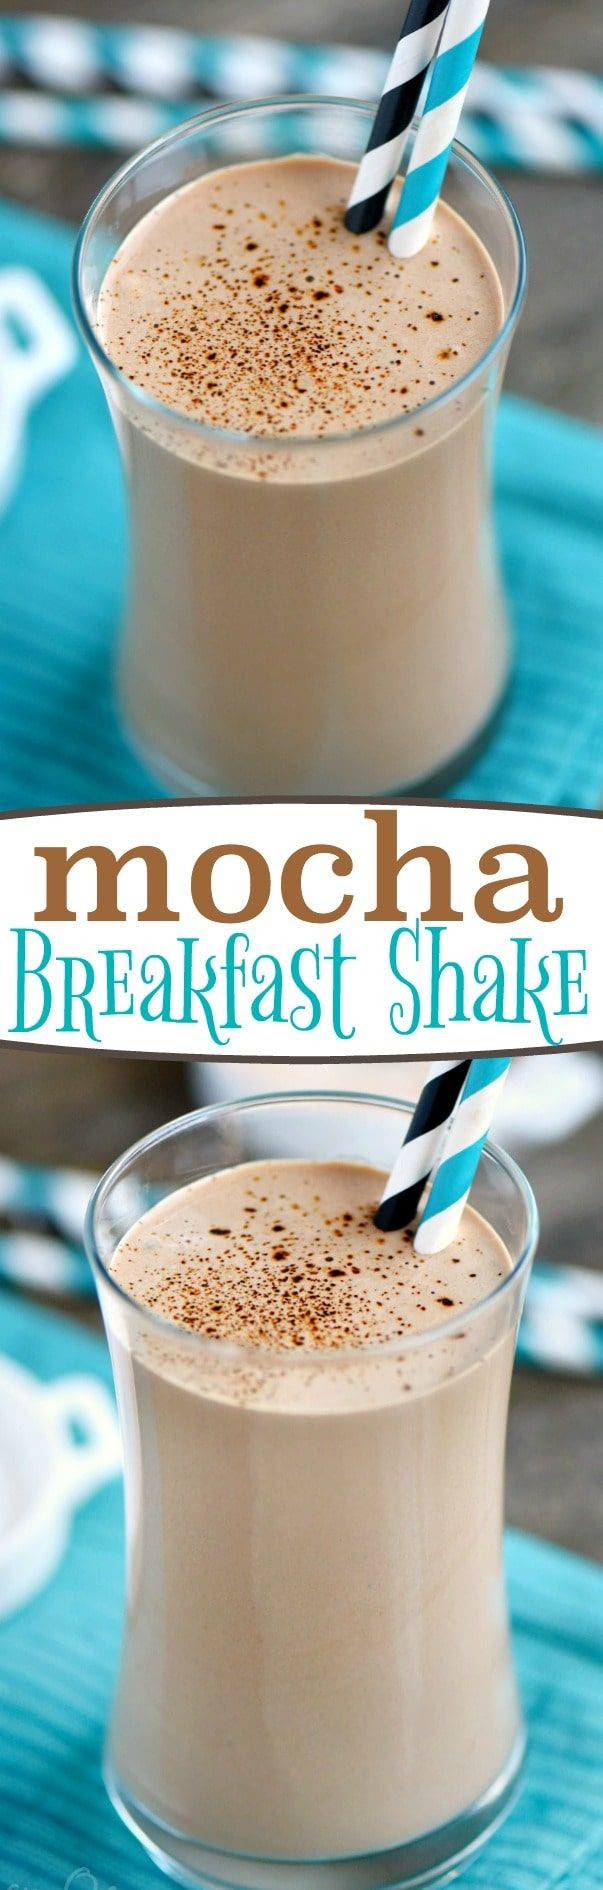 Do Mcdonald'S Smoothies Have Dairy
 This delicious Mocha Breakfast Shake is made with Greek